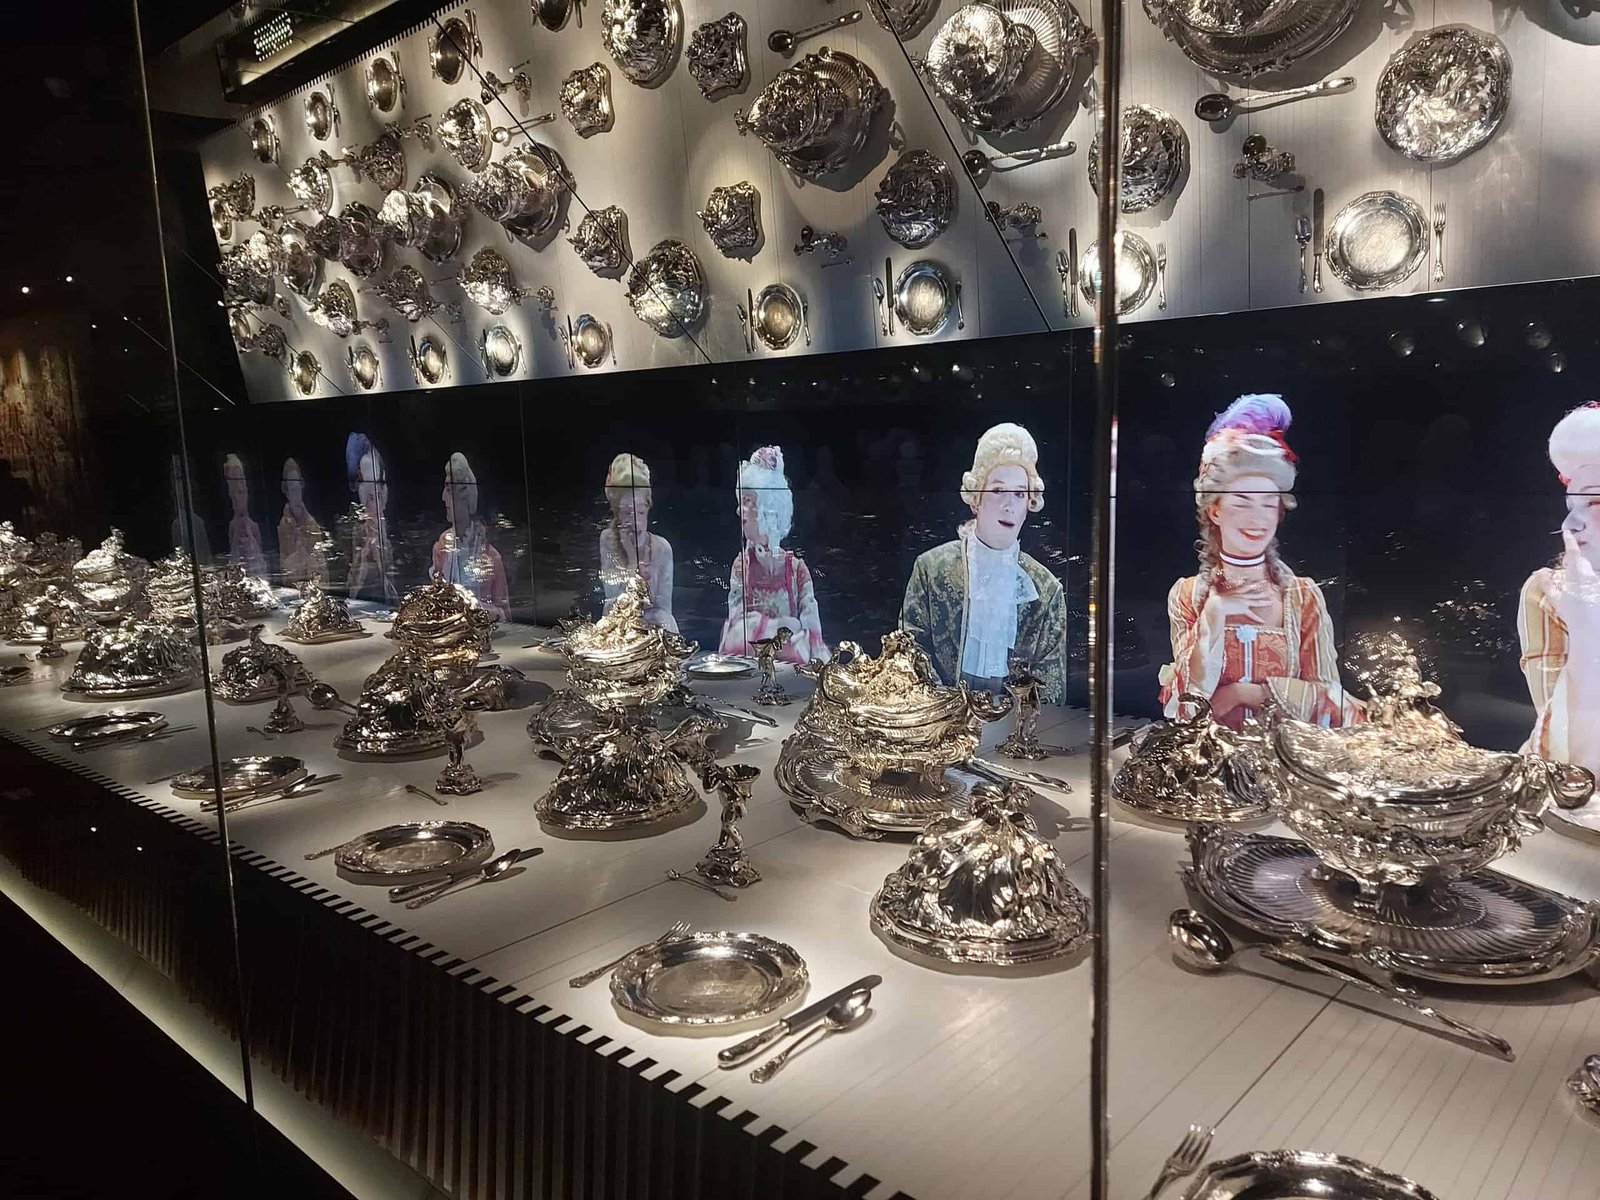 Silver meal service presented on a long table, with virtual characters, dressed in period